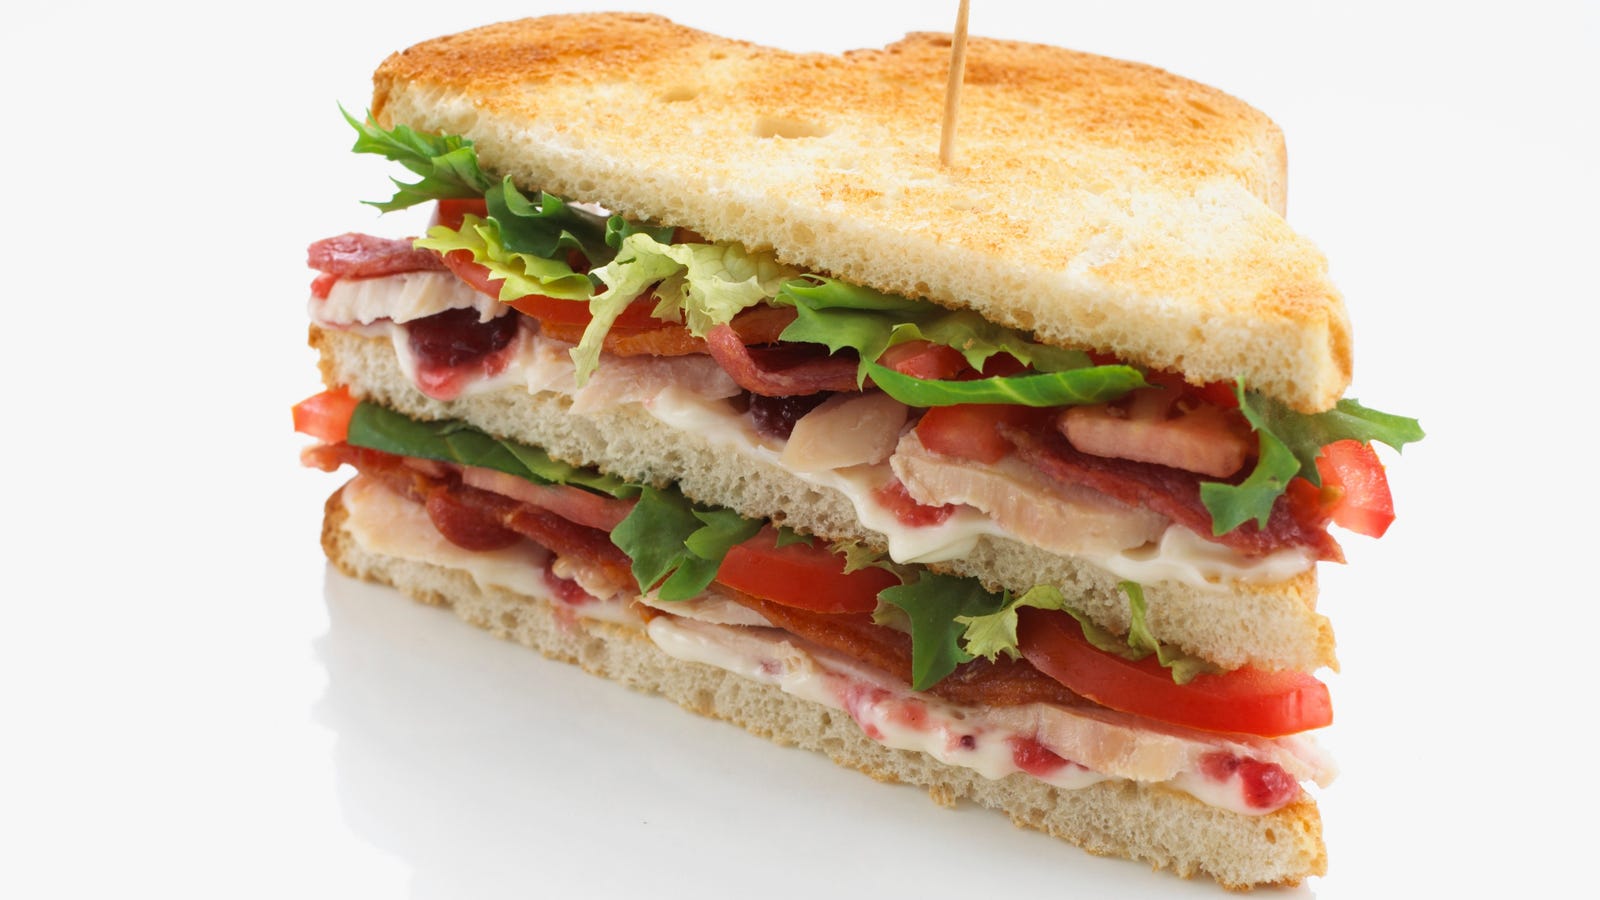 TIL the “club” in club sandwich could be an acronym